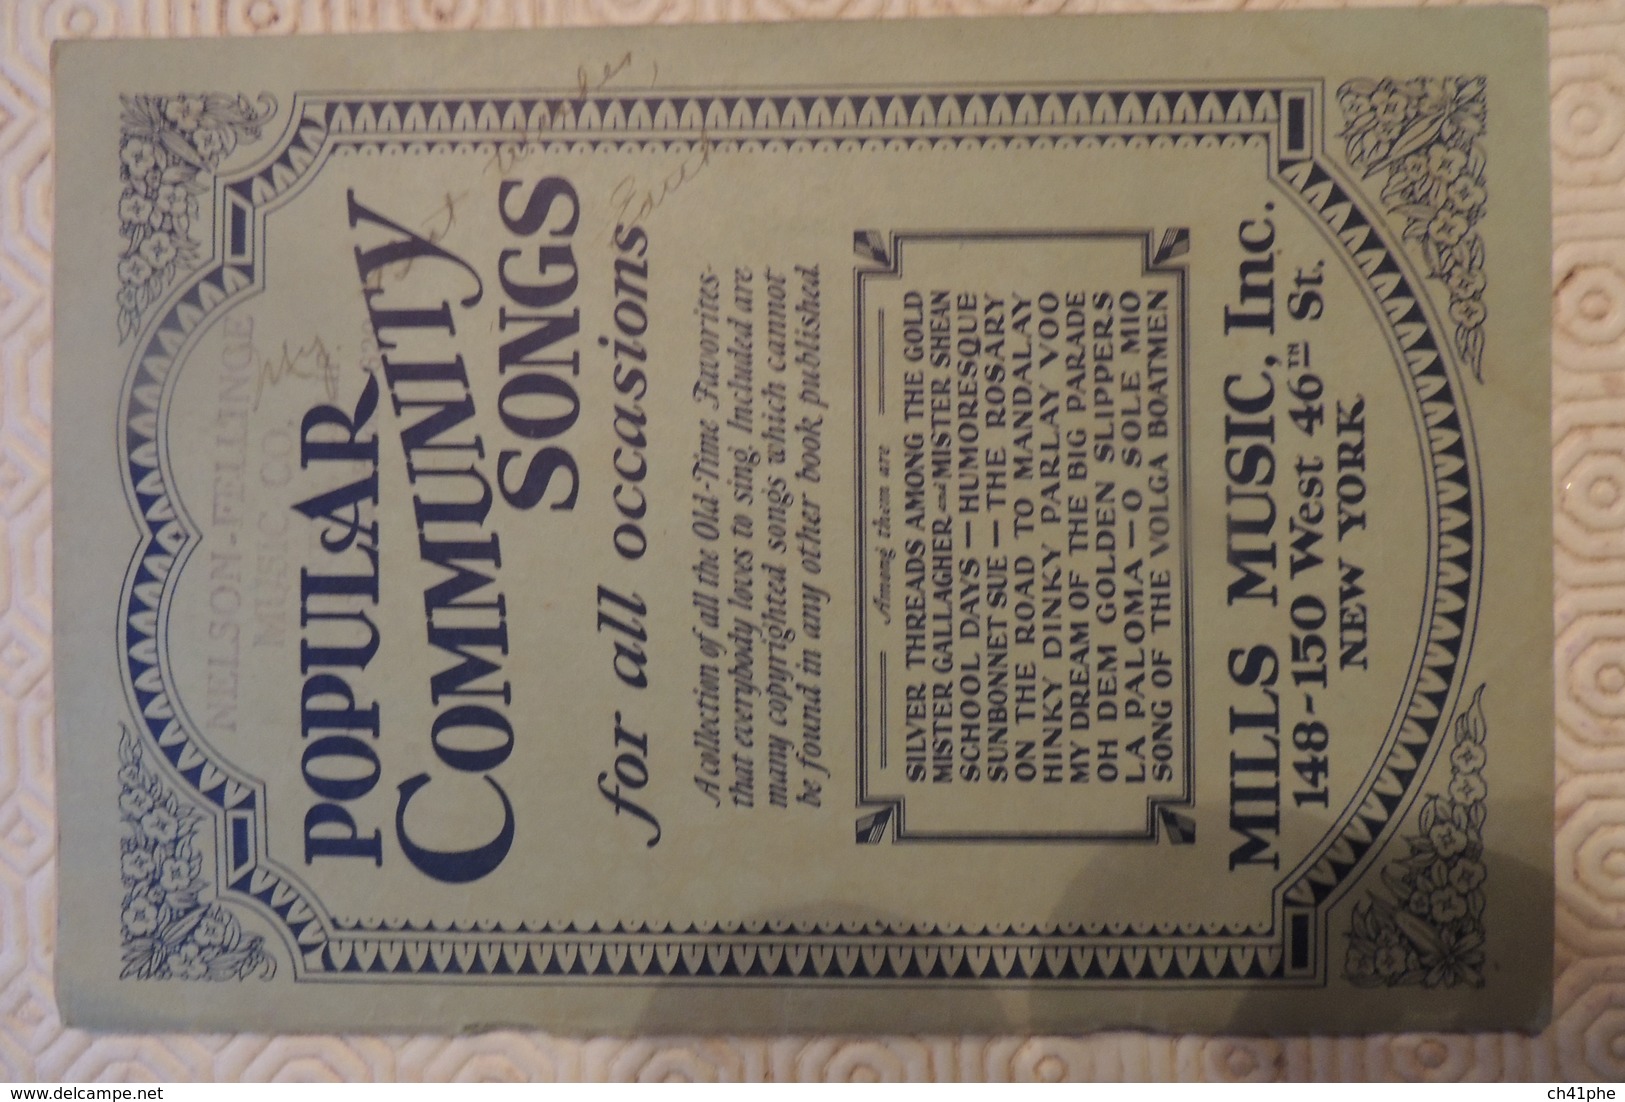 POPULAR COMMUNITY SONG FOR ALL OCCASIONS / MILLS MUSIC NEW YORK / 72 PAGES / 1920 - 1930 - Culture